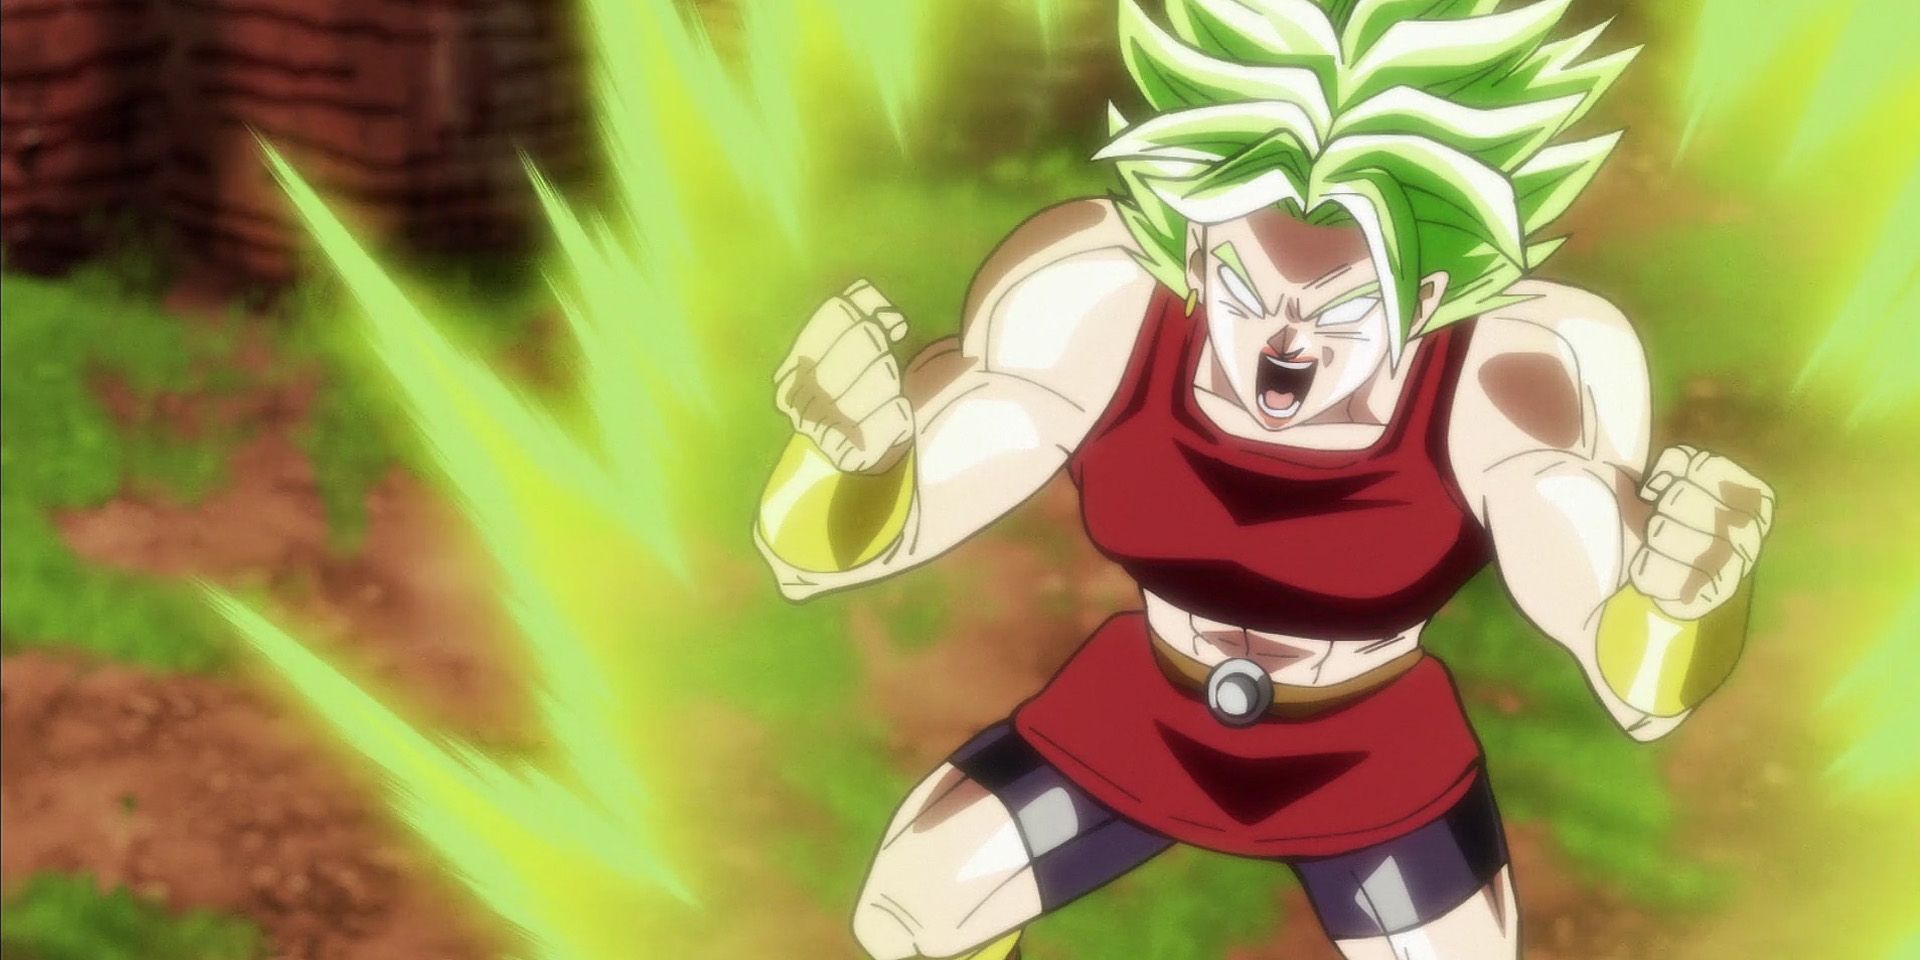 Kale from Universe 6 in Dragon Ball Super